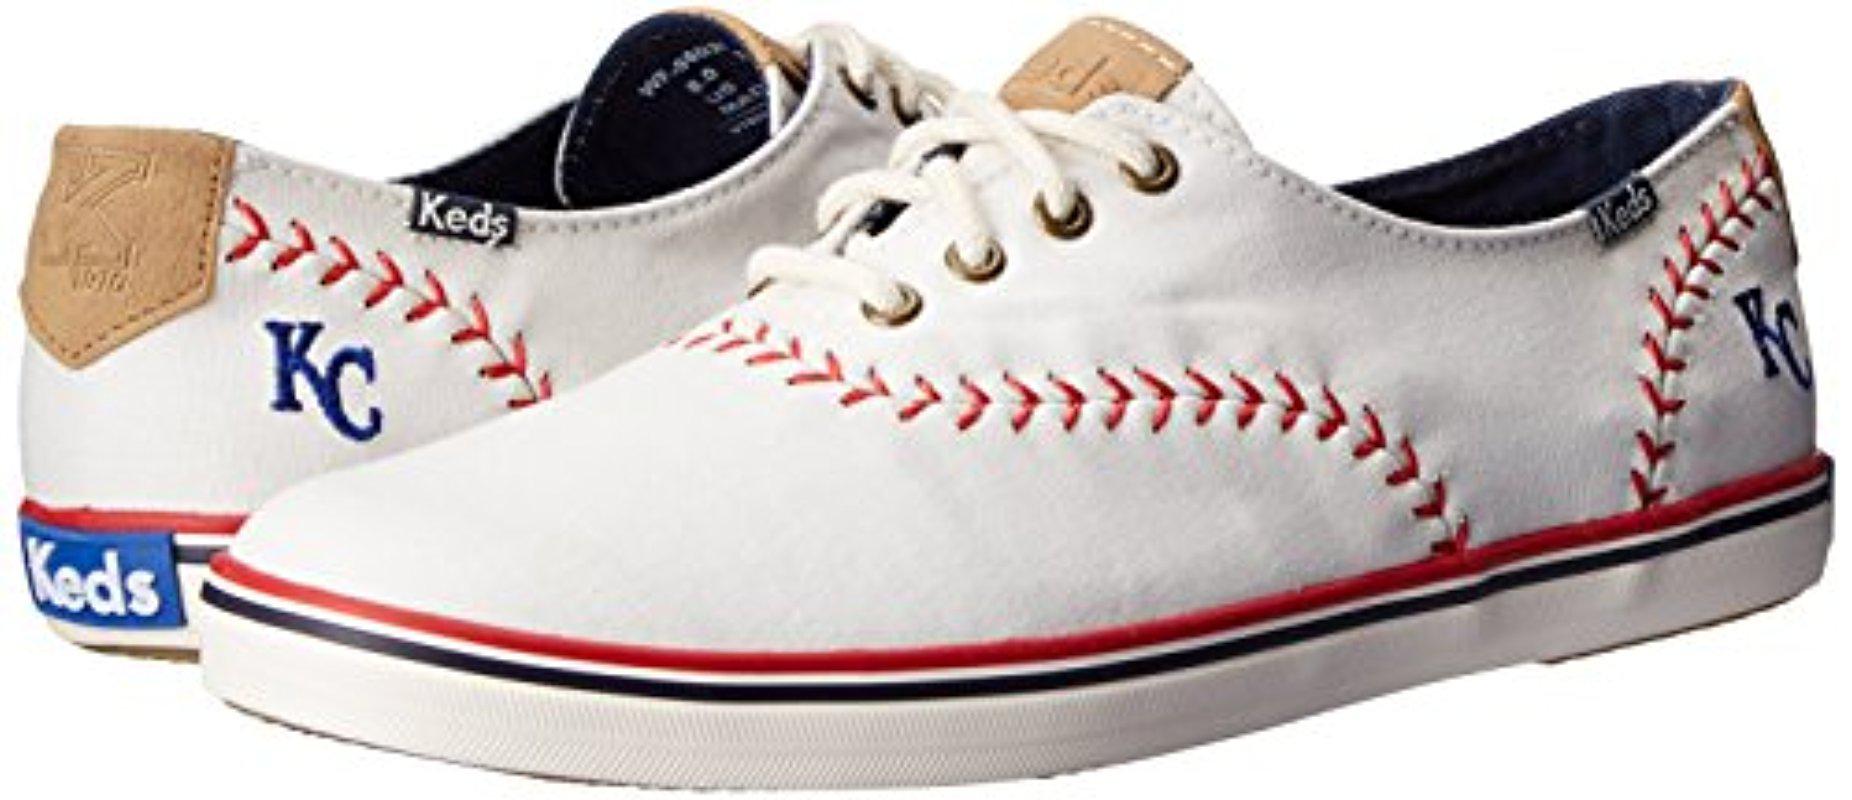 Keds Leather Pennant Fashion Sneaker 